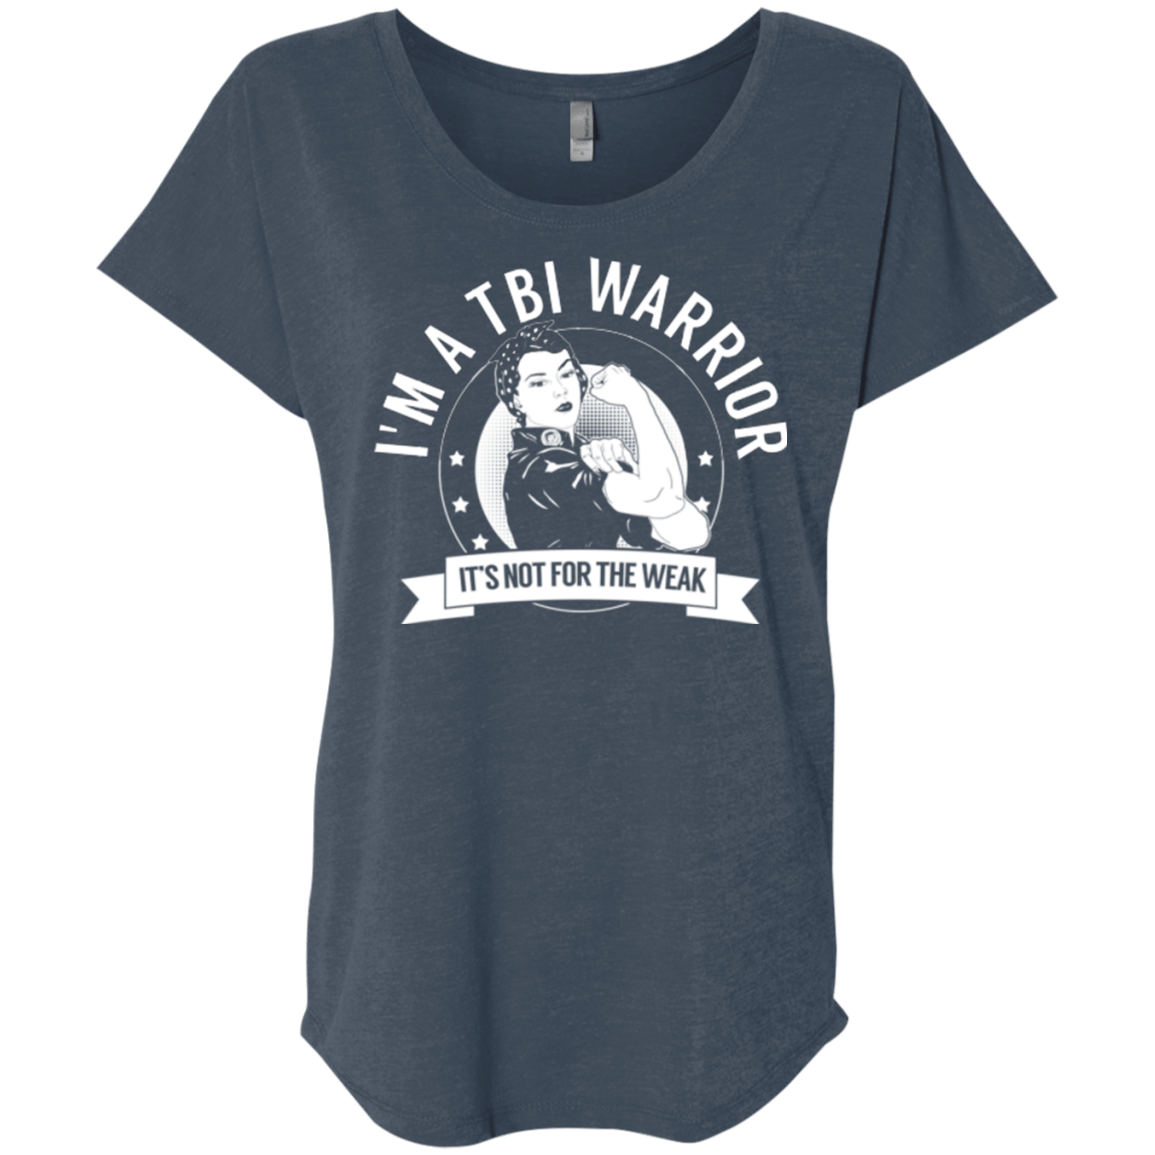 Traumatic Brain Injury - TBI Warrior Not For The Weak Dolman Sleeve - The Unchargeables